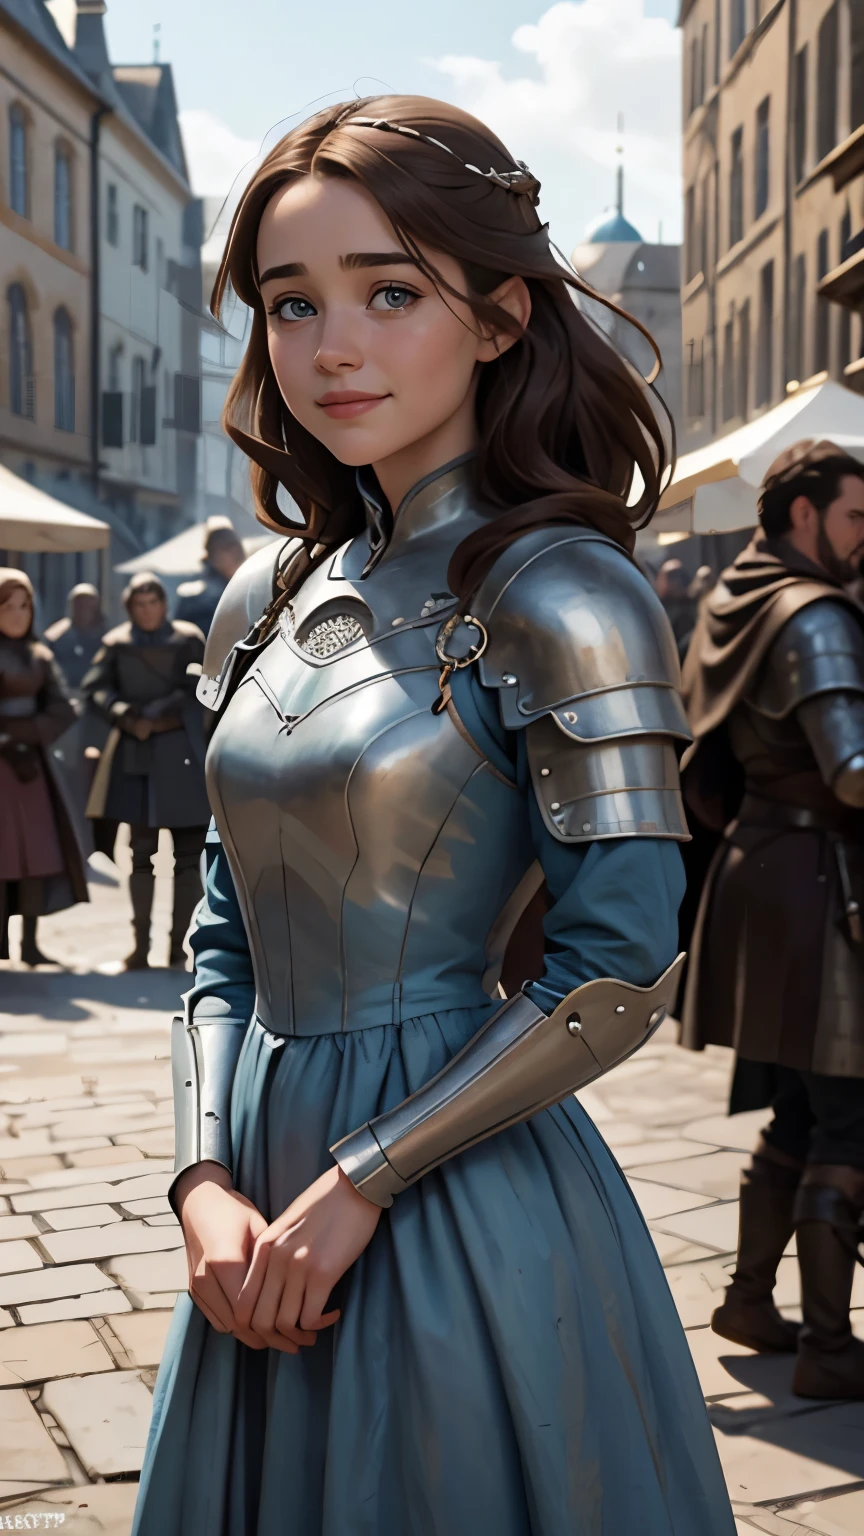 Foto hiperrealista en primer plano de Willa Fitzgerald, Create dystopian masterpieces, scene from the Game of Thrones movie, the entire figure dressed in Game of Thrones style, light blue dress with armor accessories, om a medieval market square,  beautiful woman, skinny, small breasts, straight brown hair, detailed face, smile smile, photo taken from a distance, age 20 tears old